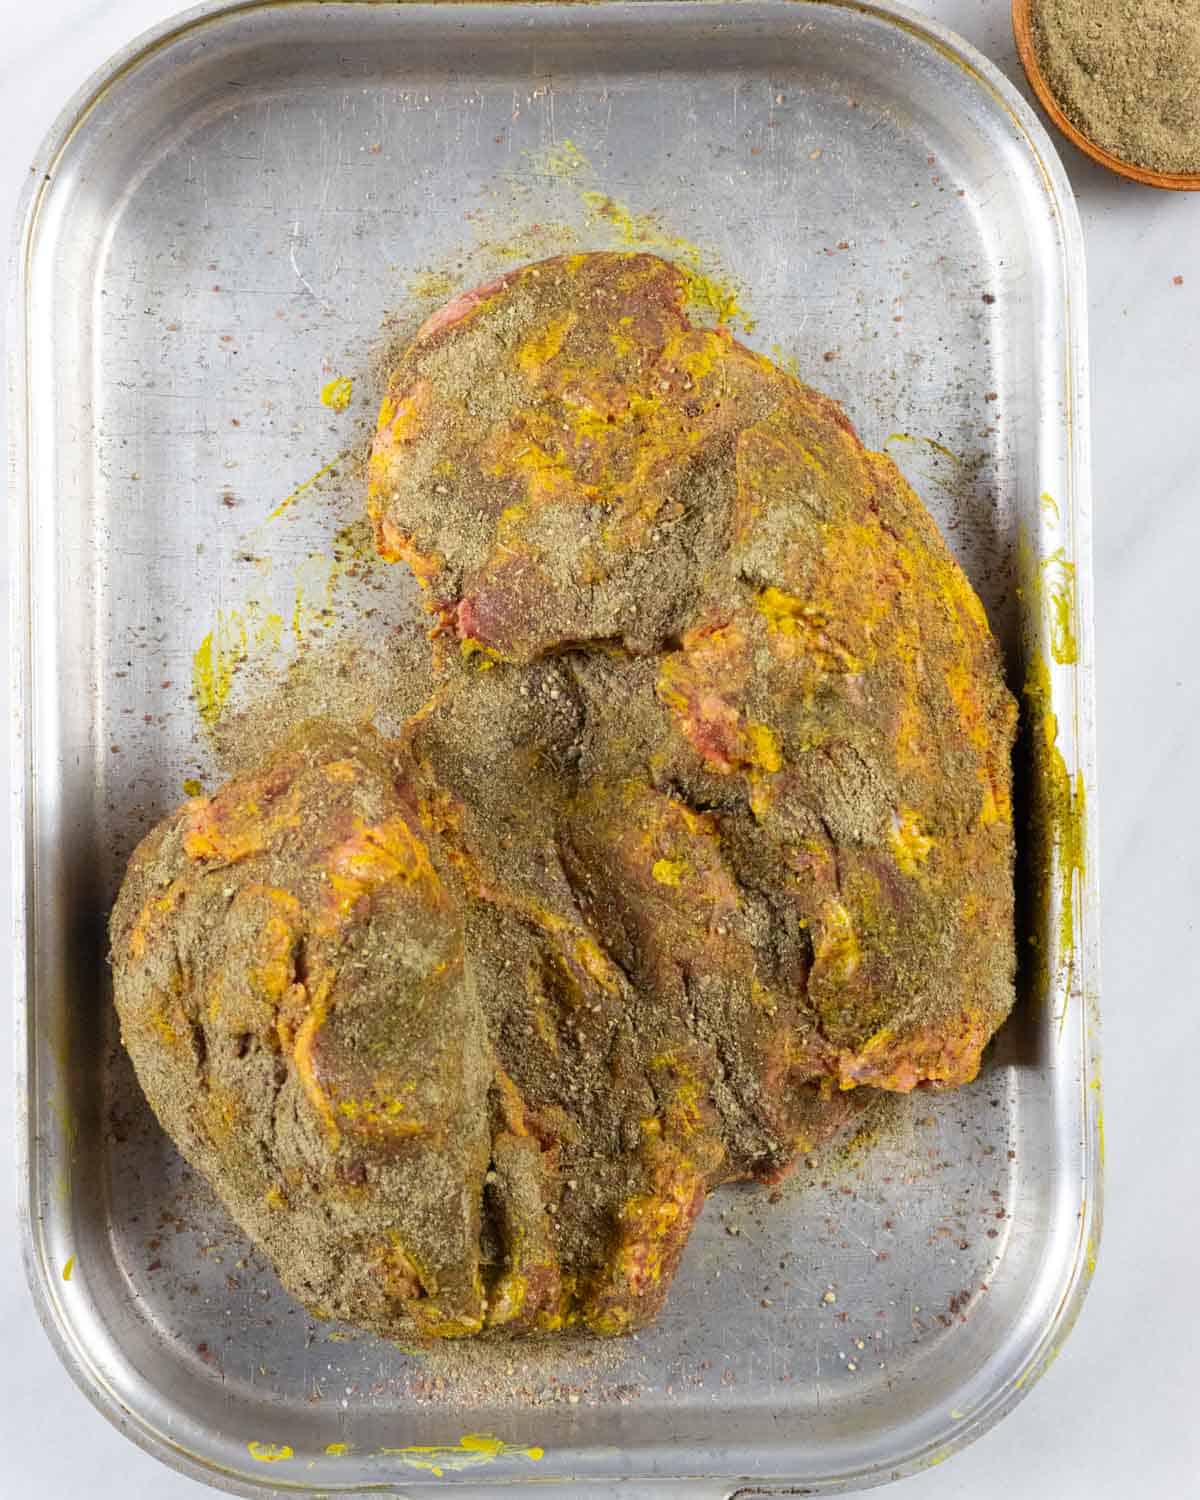 Inside of lamb roast smeared with yellow mustard and sprinkled generously with dry rub mix.